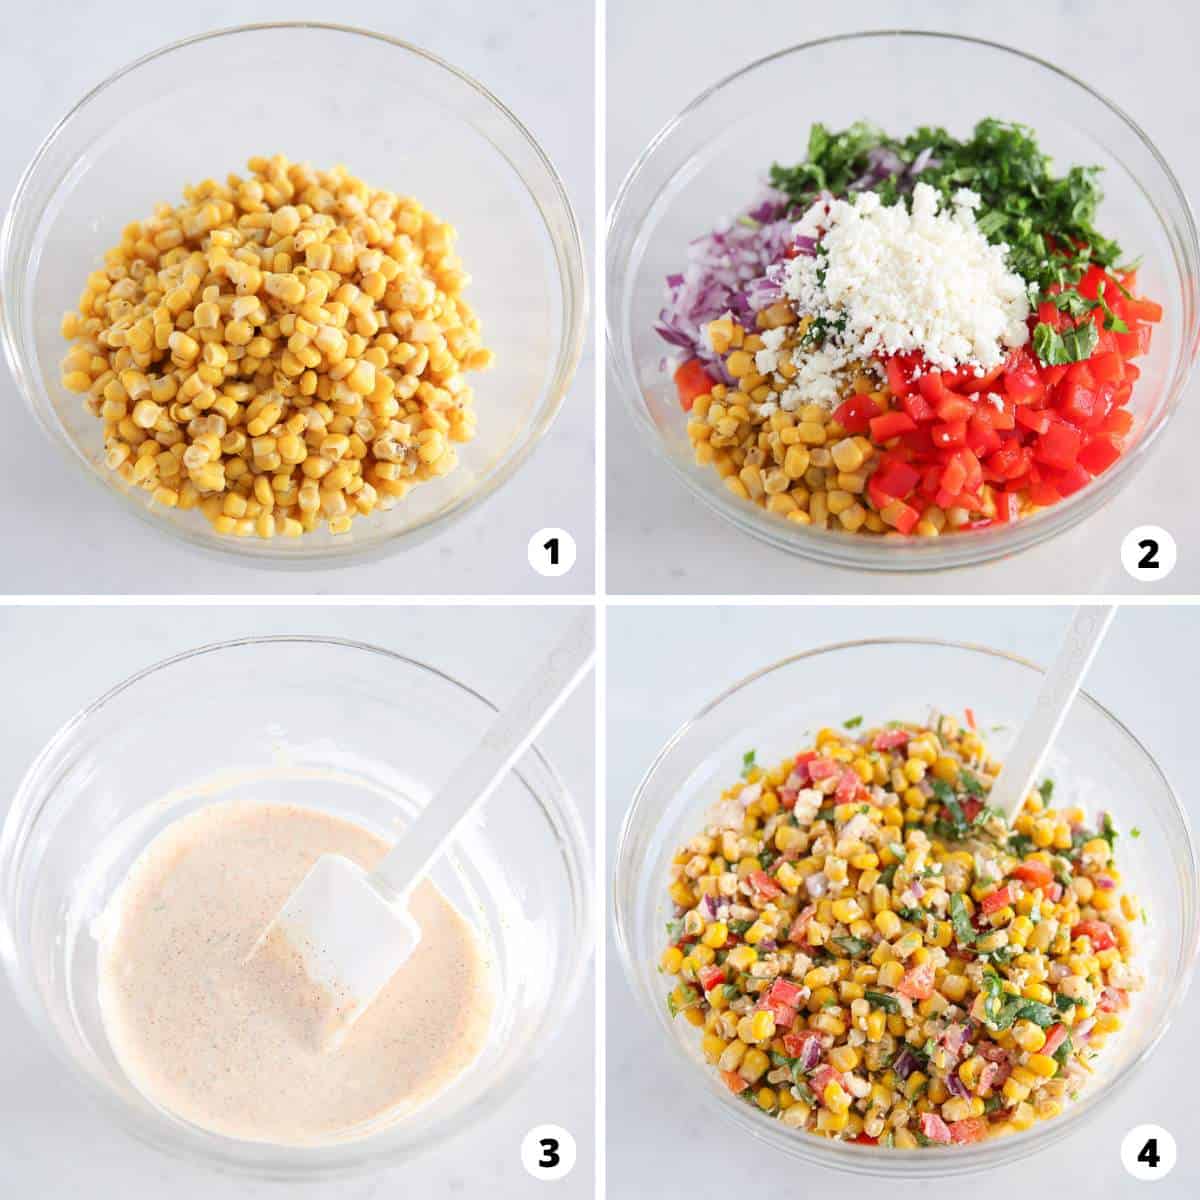 Showing how to make Mexican corn salad in a 4 step collage.